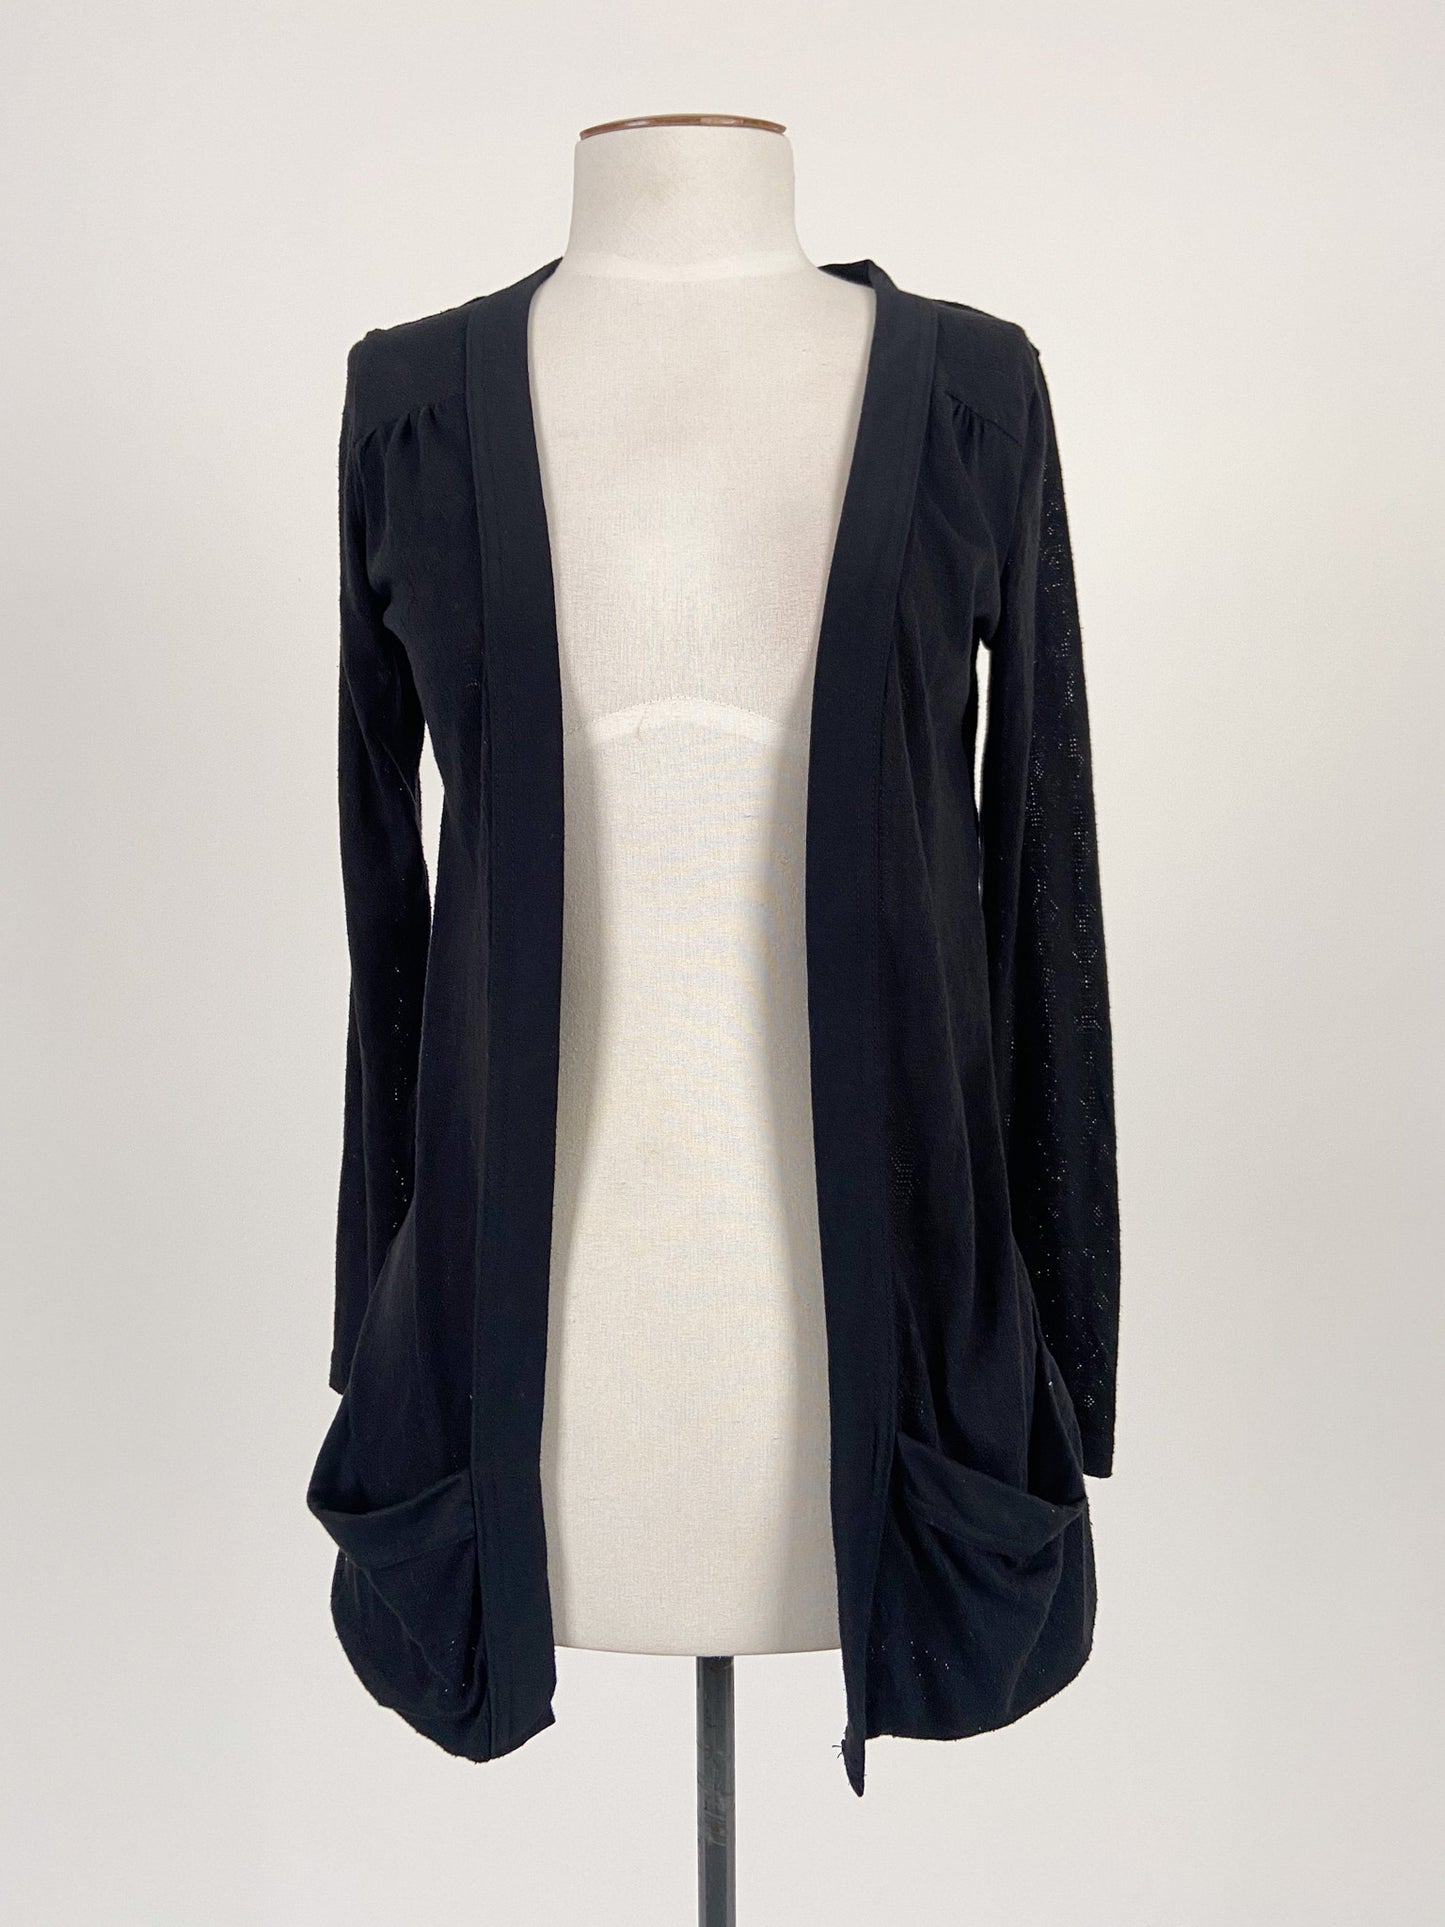 Cotton On | Black Casual/Workwear Cardigan | Size S